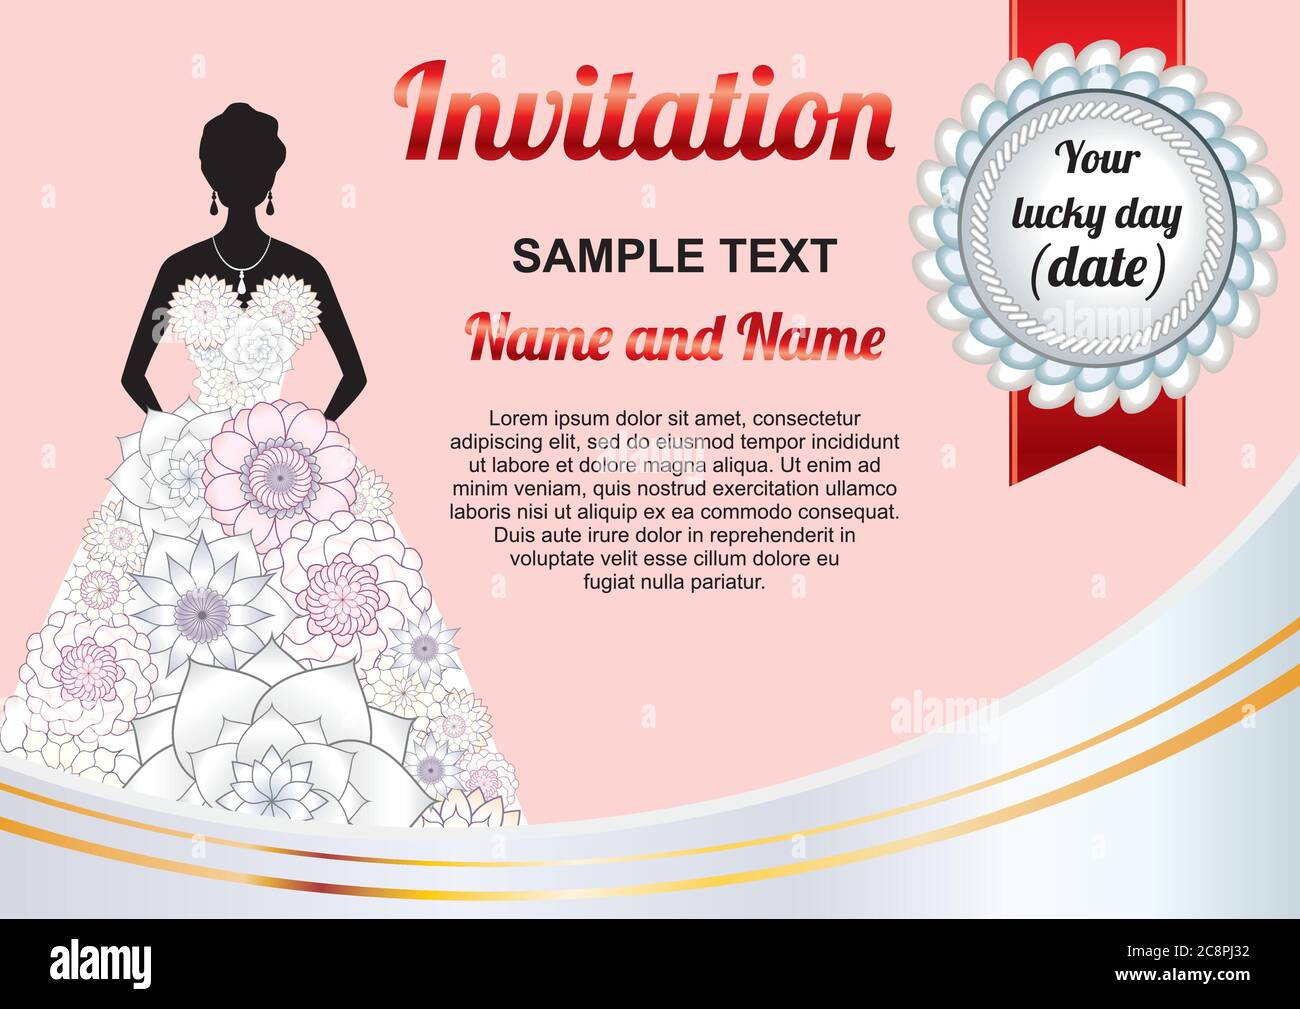 Amazing, luxurious wedding invitation or a poster, greeting card with pink background and a bride in a dress with white flowers. Stock Vector